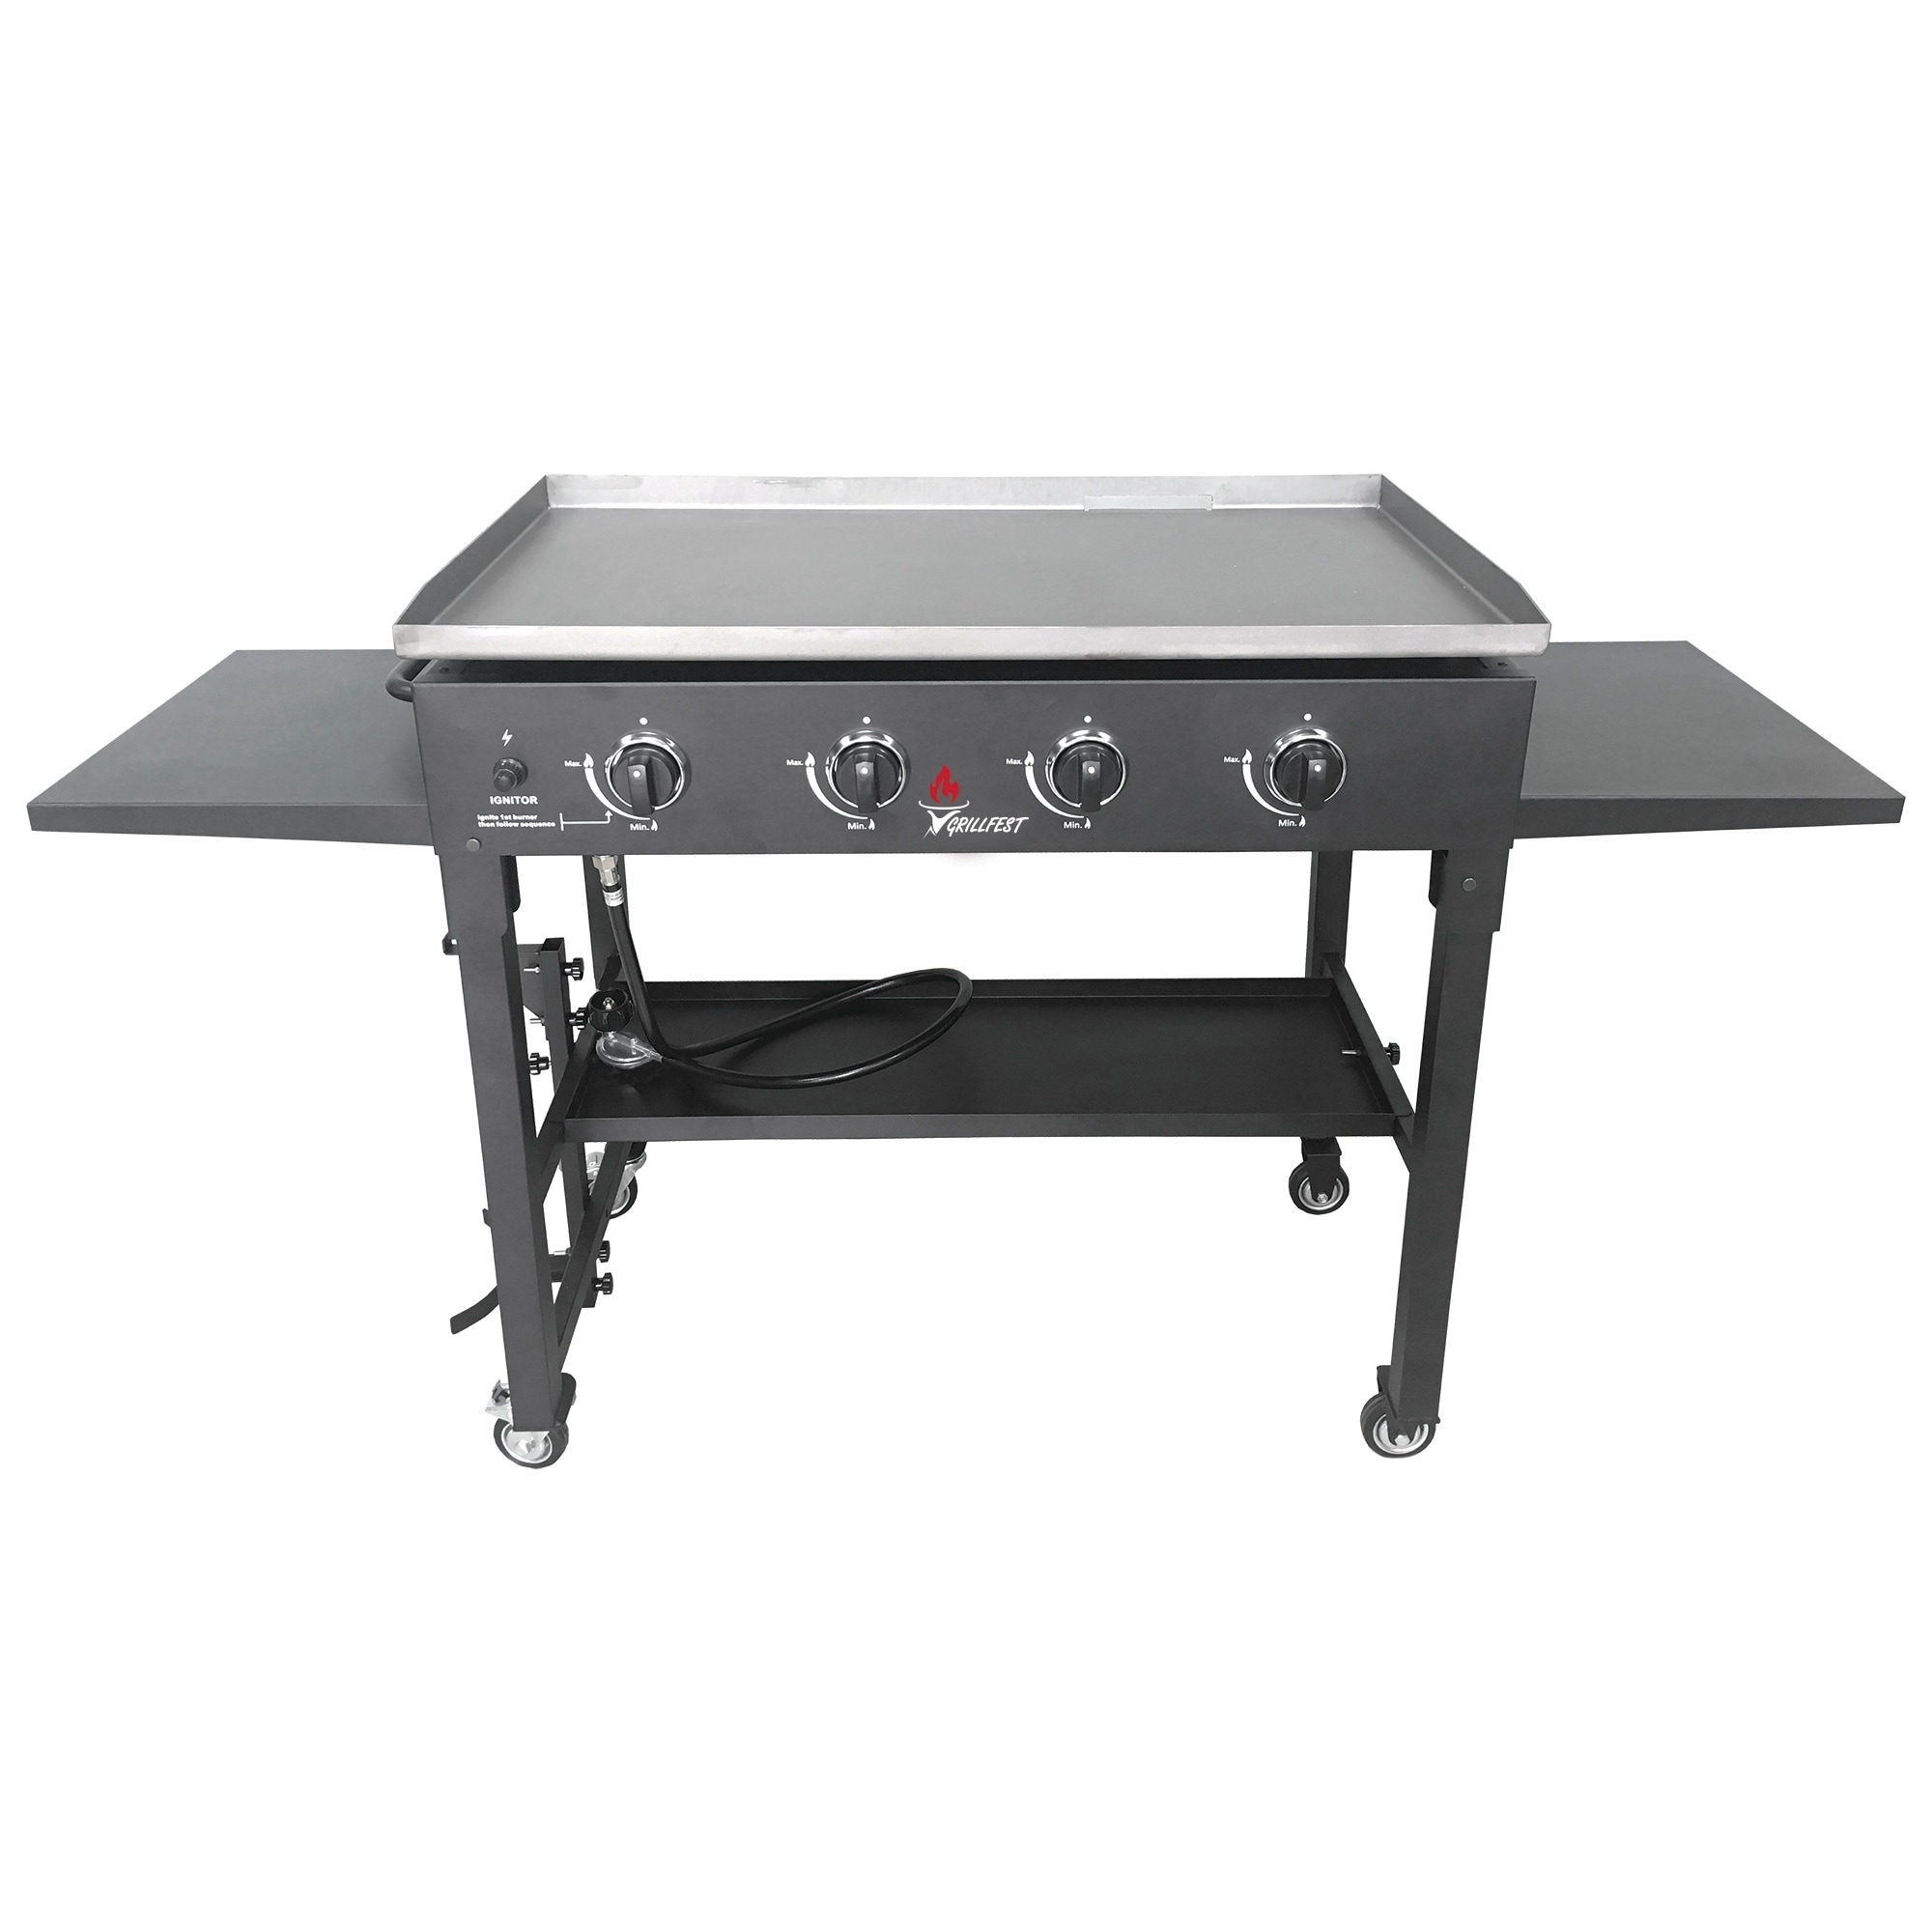 https://ak1.ostkcdn.com/images/products/is/images/direct/7d975f6b08e305518fd723db23f08c51e4cfda73/GrillFest-4-Burner-Gas-Griddle.jpg